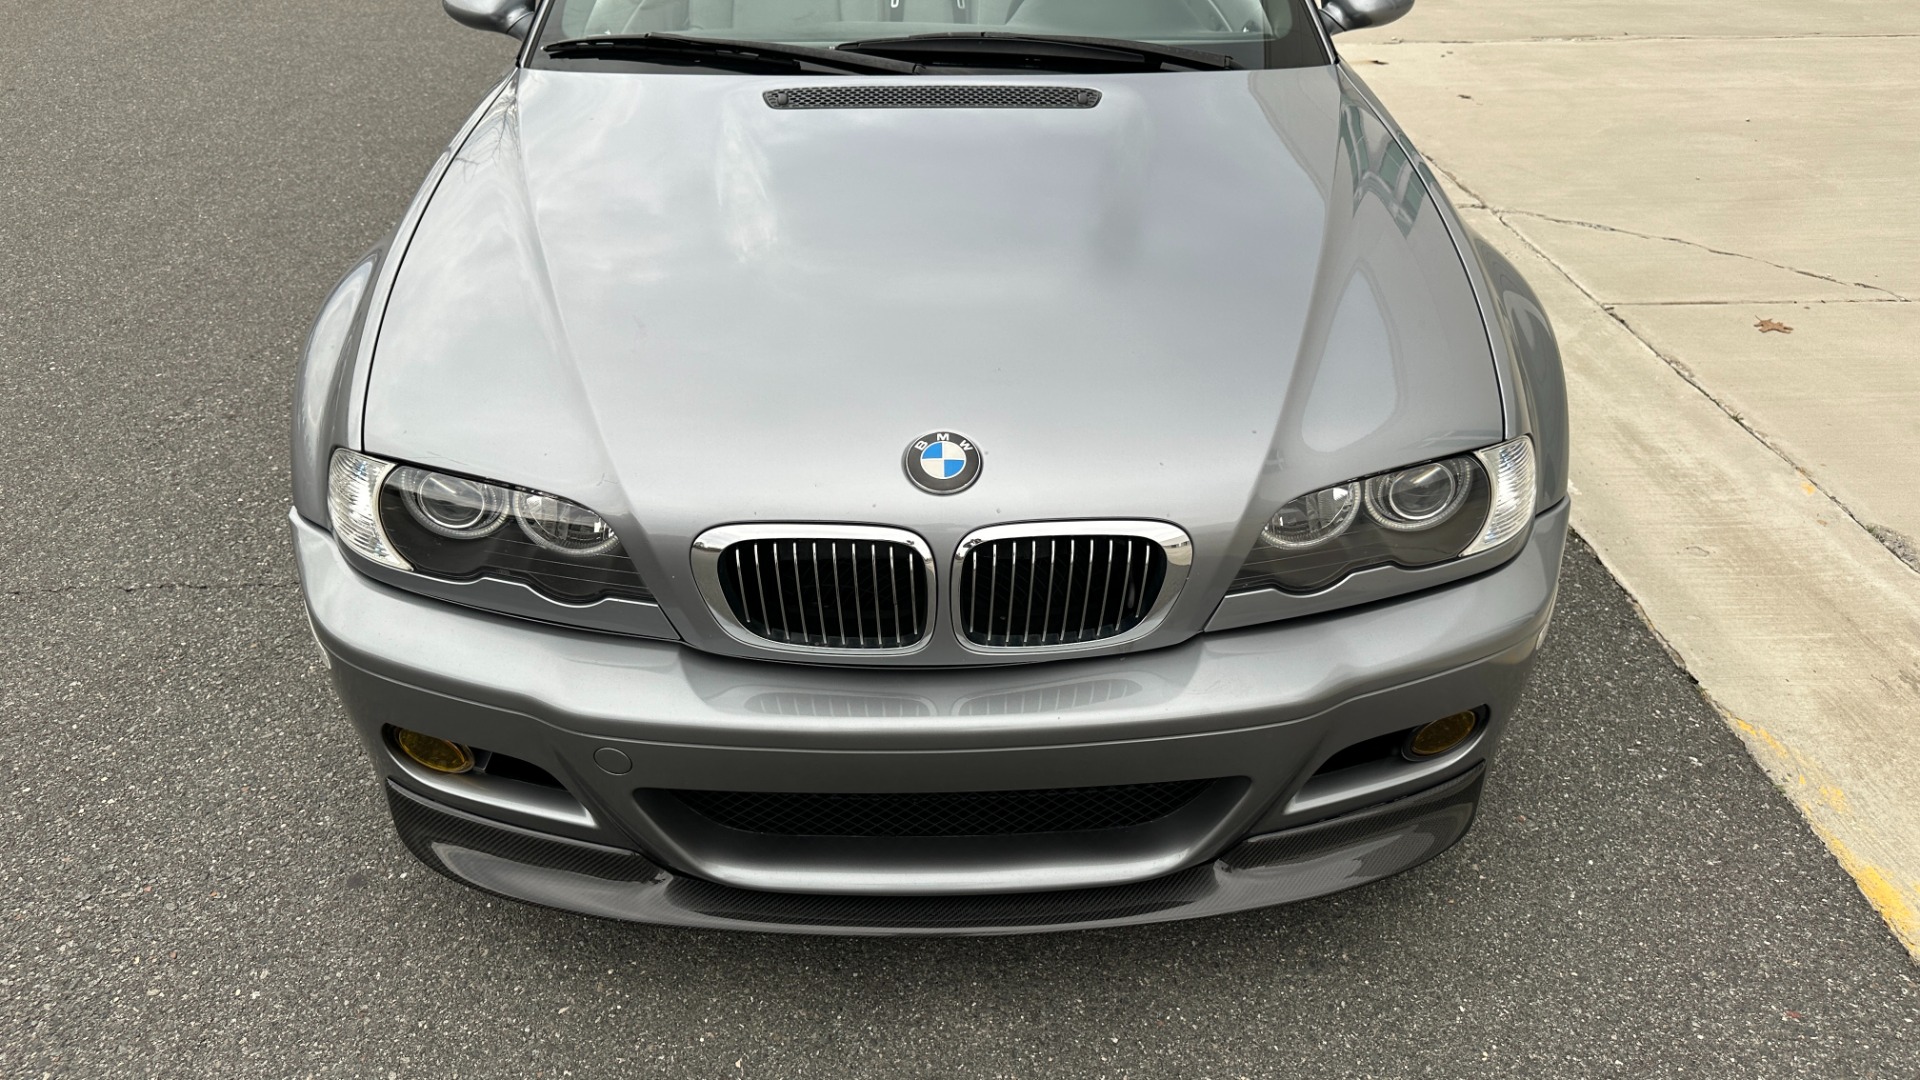 Used 2006 BMW M3 CONVERTIBLE / SMG AUTO / LEATHER / INLINE 6CYL / CARBON FIBER for sale $26,995 at Formula Imports in Charlotte NC 28227 43